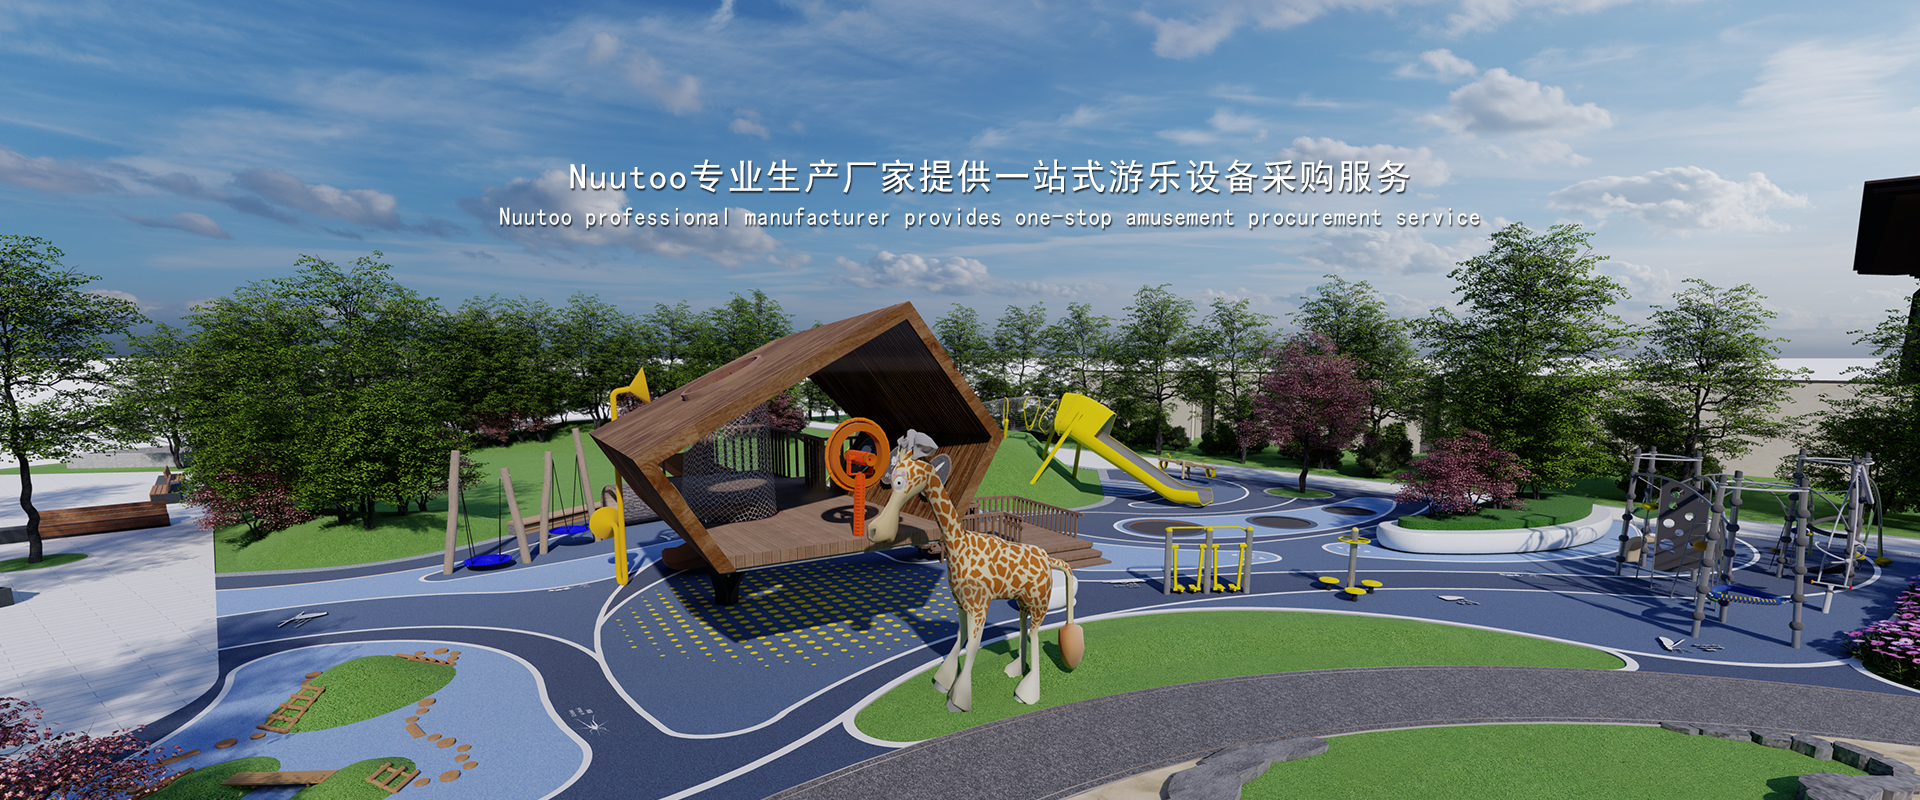 What are the playing equipment in the Outdoor Children's Paradise?